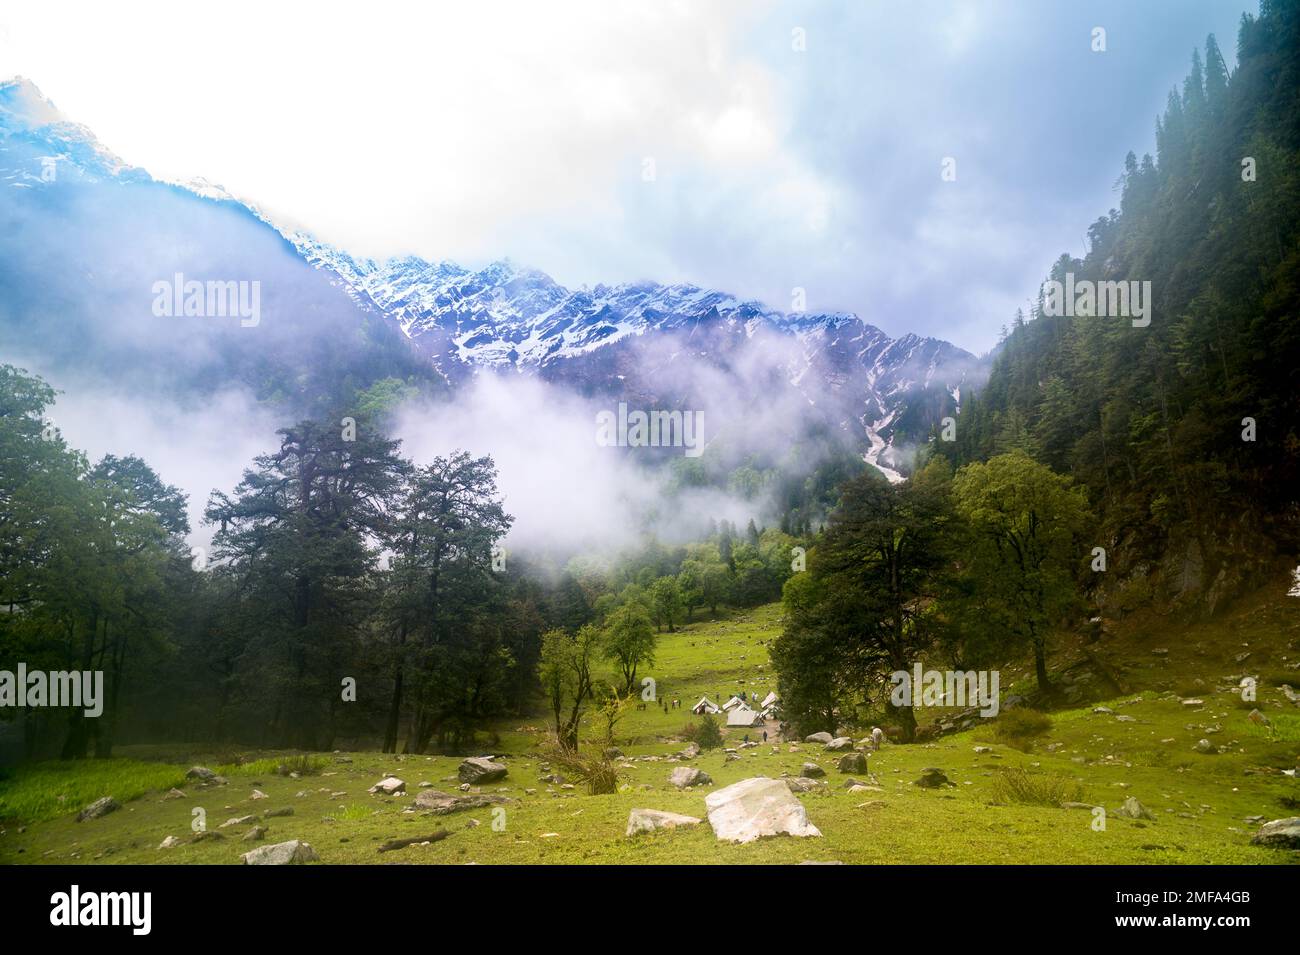 Landscape with fog. This is the scenic view of the Himalayas peaks and alpine landscape from the trail of Sar Pass trek Himalayan region of Kasol, Him Stock Photo